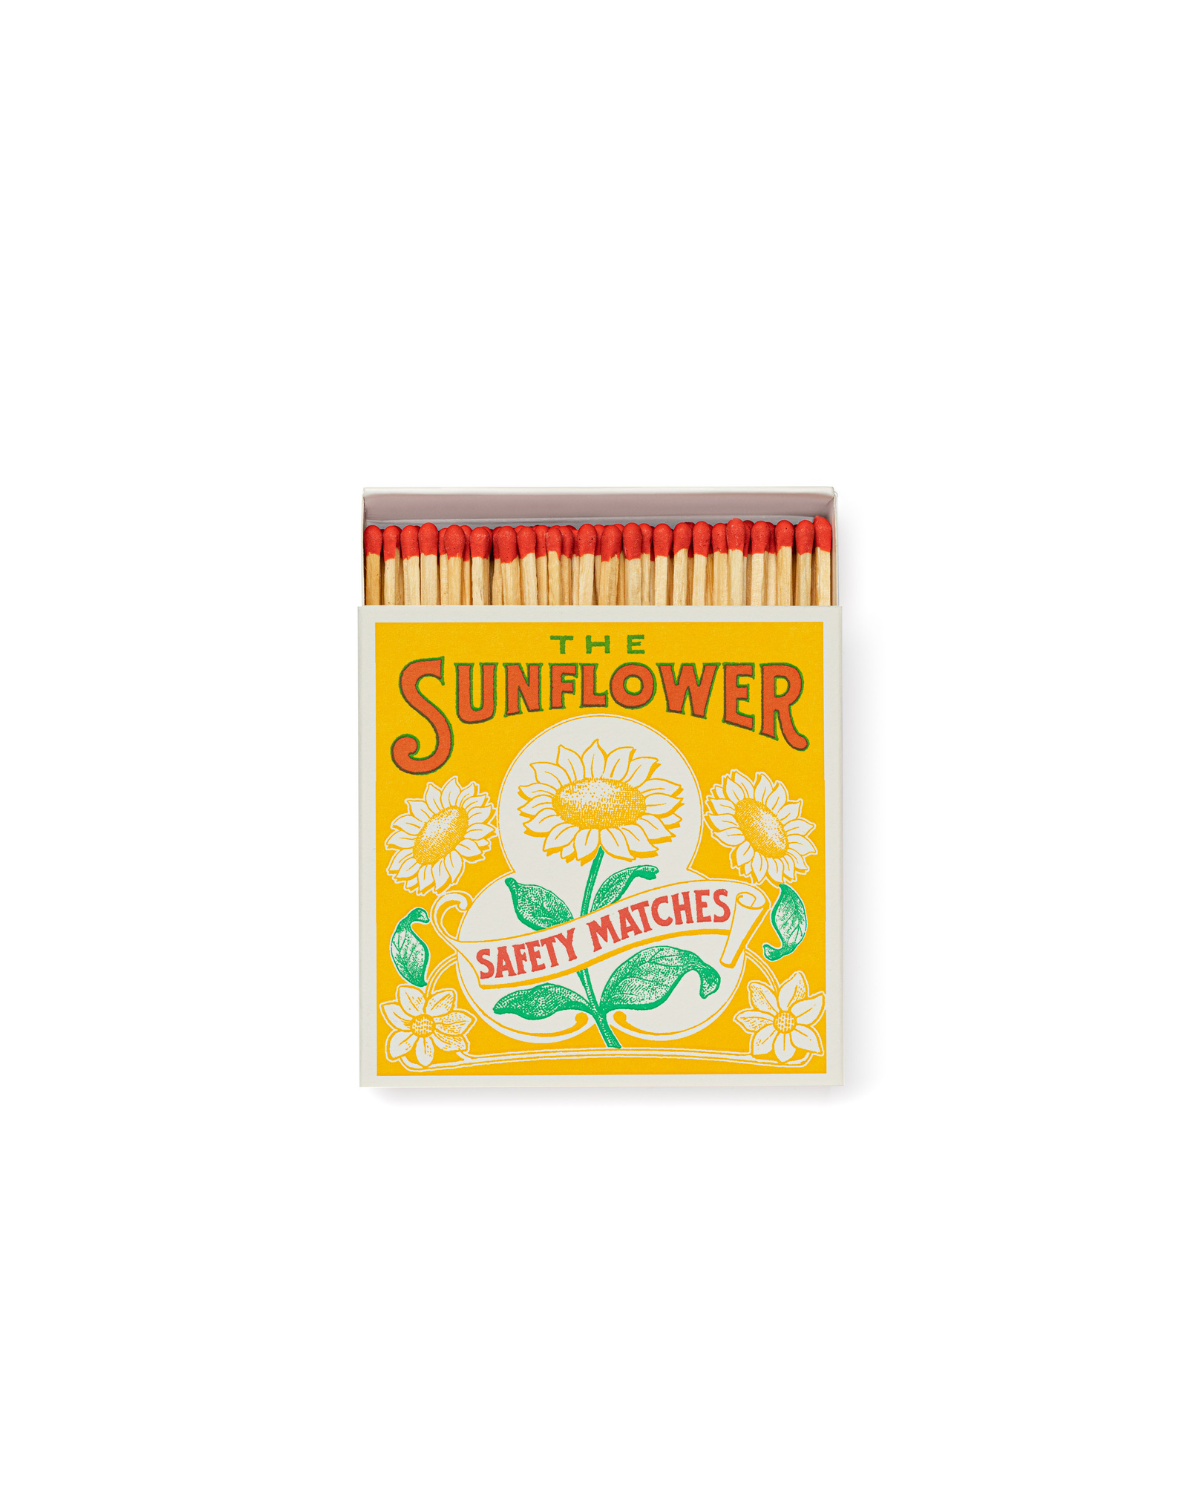 The Sunflower Luxury Matches are summertime on a matchbox. Sunshiney yellow, meadow-green and gorgeous floral illustrations make for one of the happiest designs you ever did see. The perfect way to make someone smile, whatever the weather.The Sunflower Luxury Matches are summertime on a matchbox. Sunshiney yellow, meadow-green and gorgeous floral illustrations make for one of the happiest designs you ever did see.